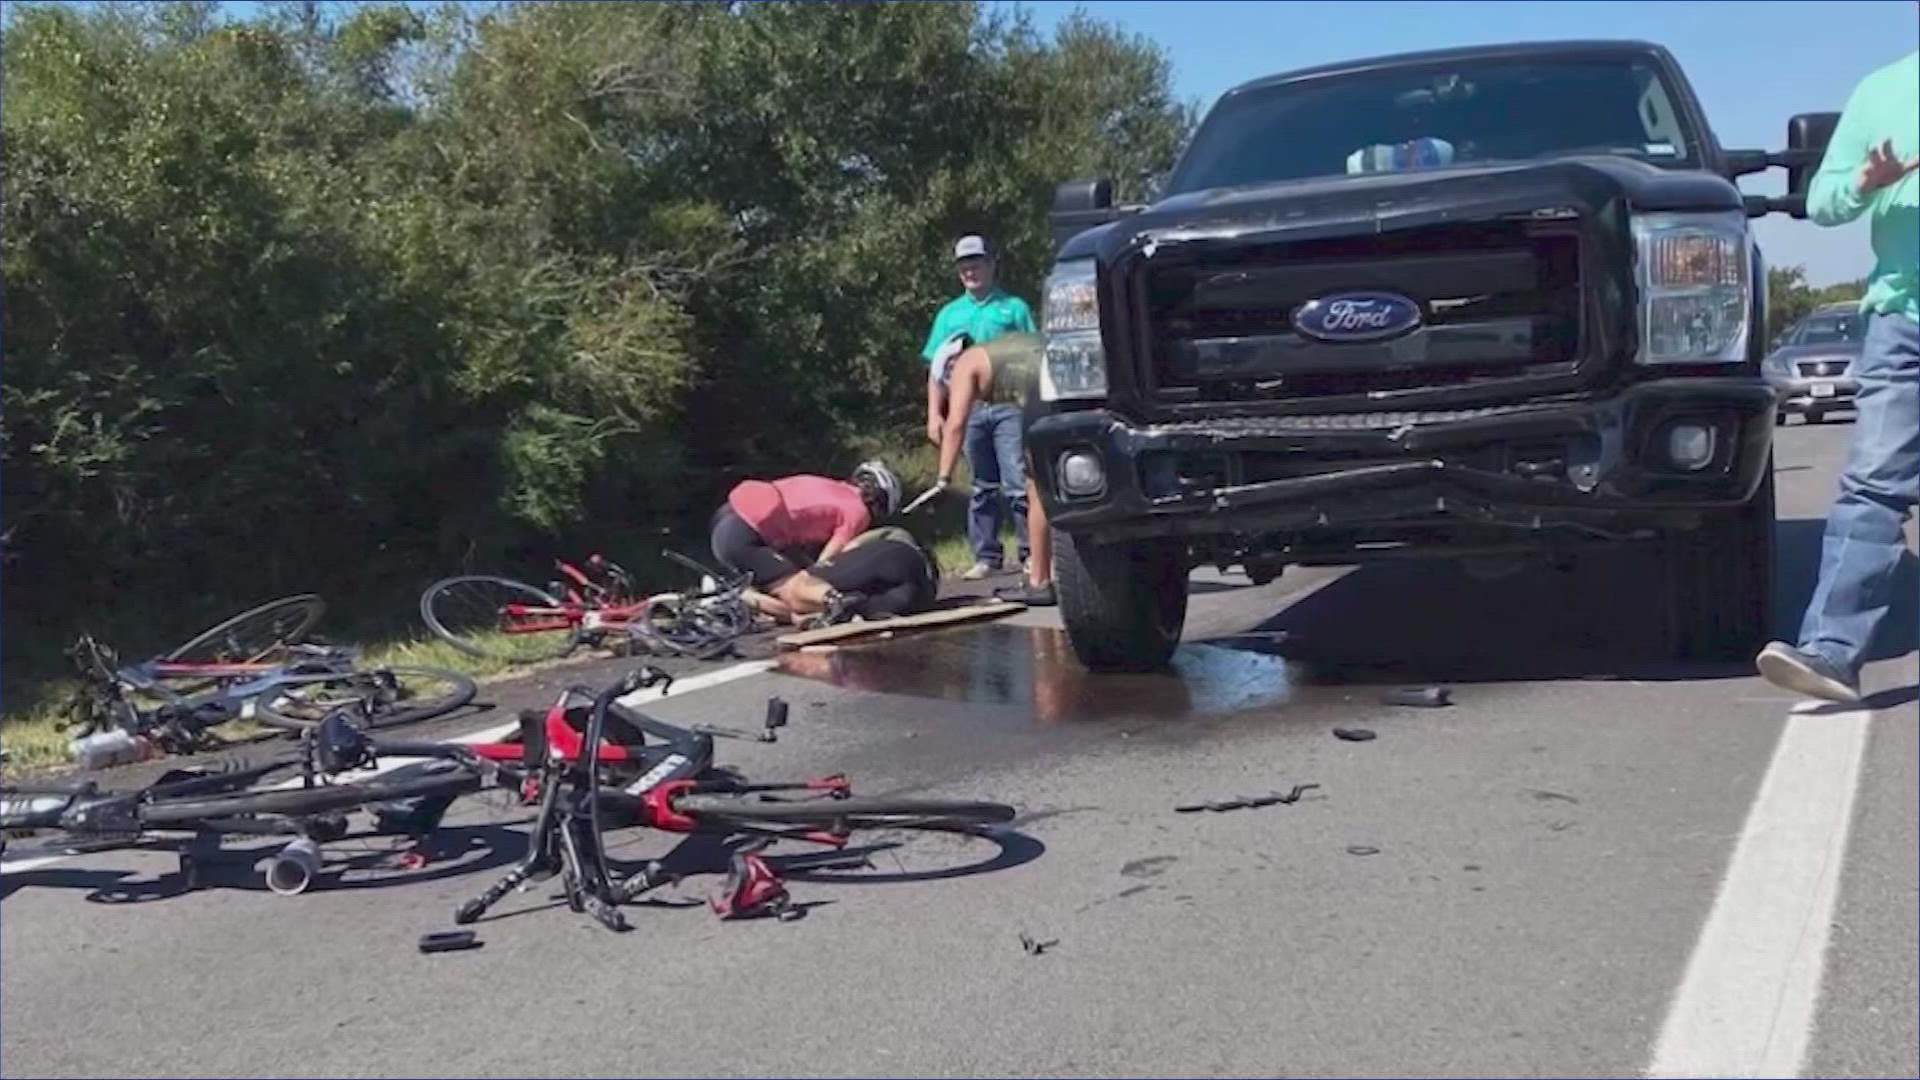 A special prosecutor said the driver who allegedly crashed into multiple bicyclists in Waller County could be facing serious charges.